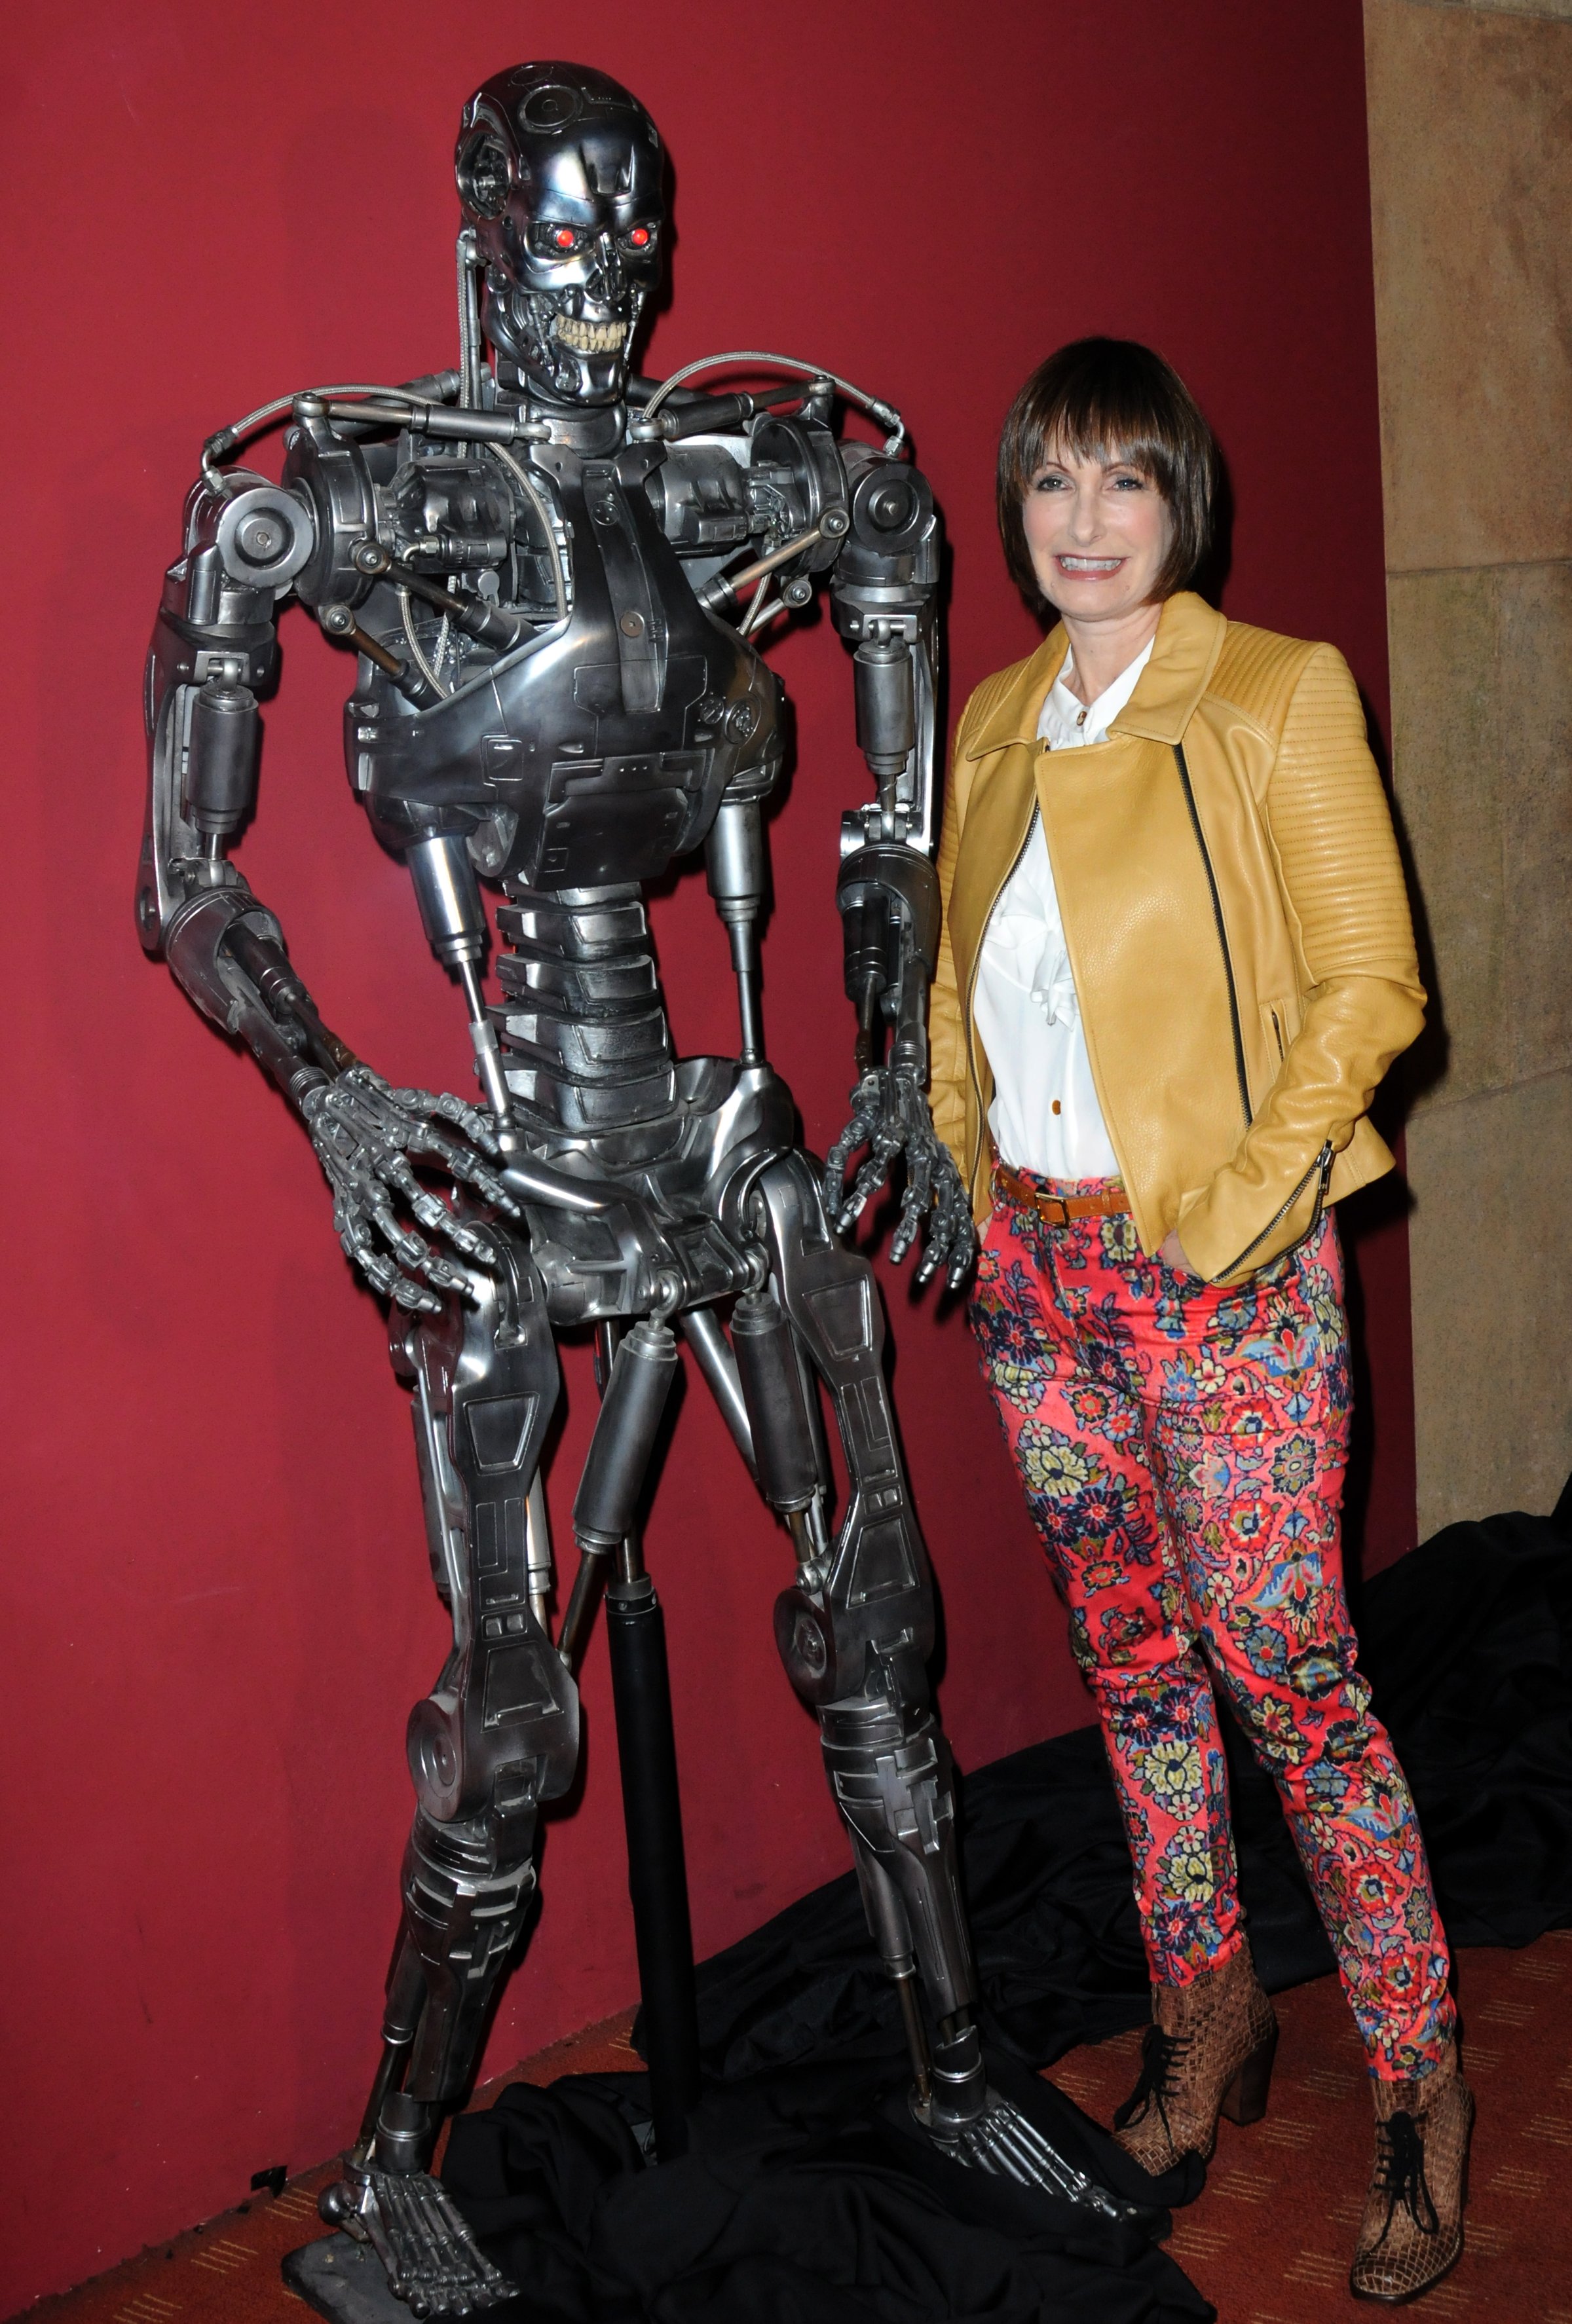 Producer Gale Anne Hurd at "The Terminator" 30th Anniversary Screening on October 15, 2014 in Hollywood, California.